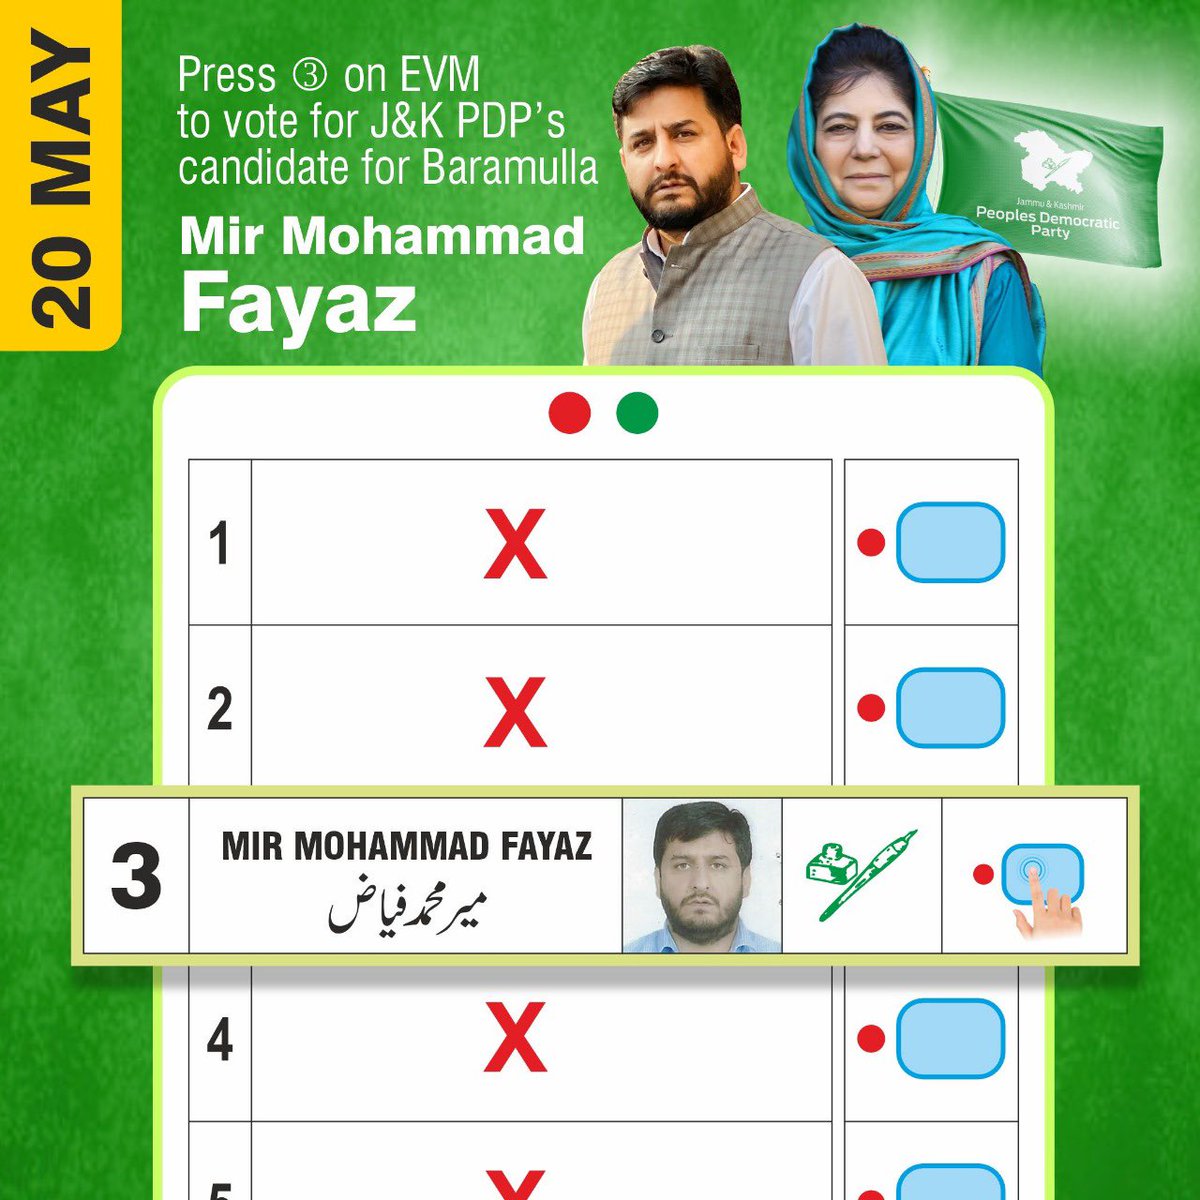 Mark your calendars for 20th May! Vote Serial No- 3 For @MirMohdFayaz . 

#Savethedate

@jkpdp